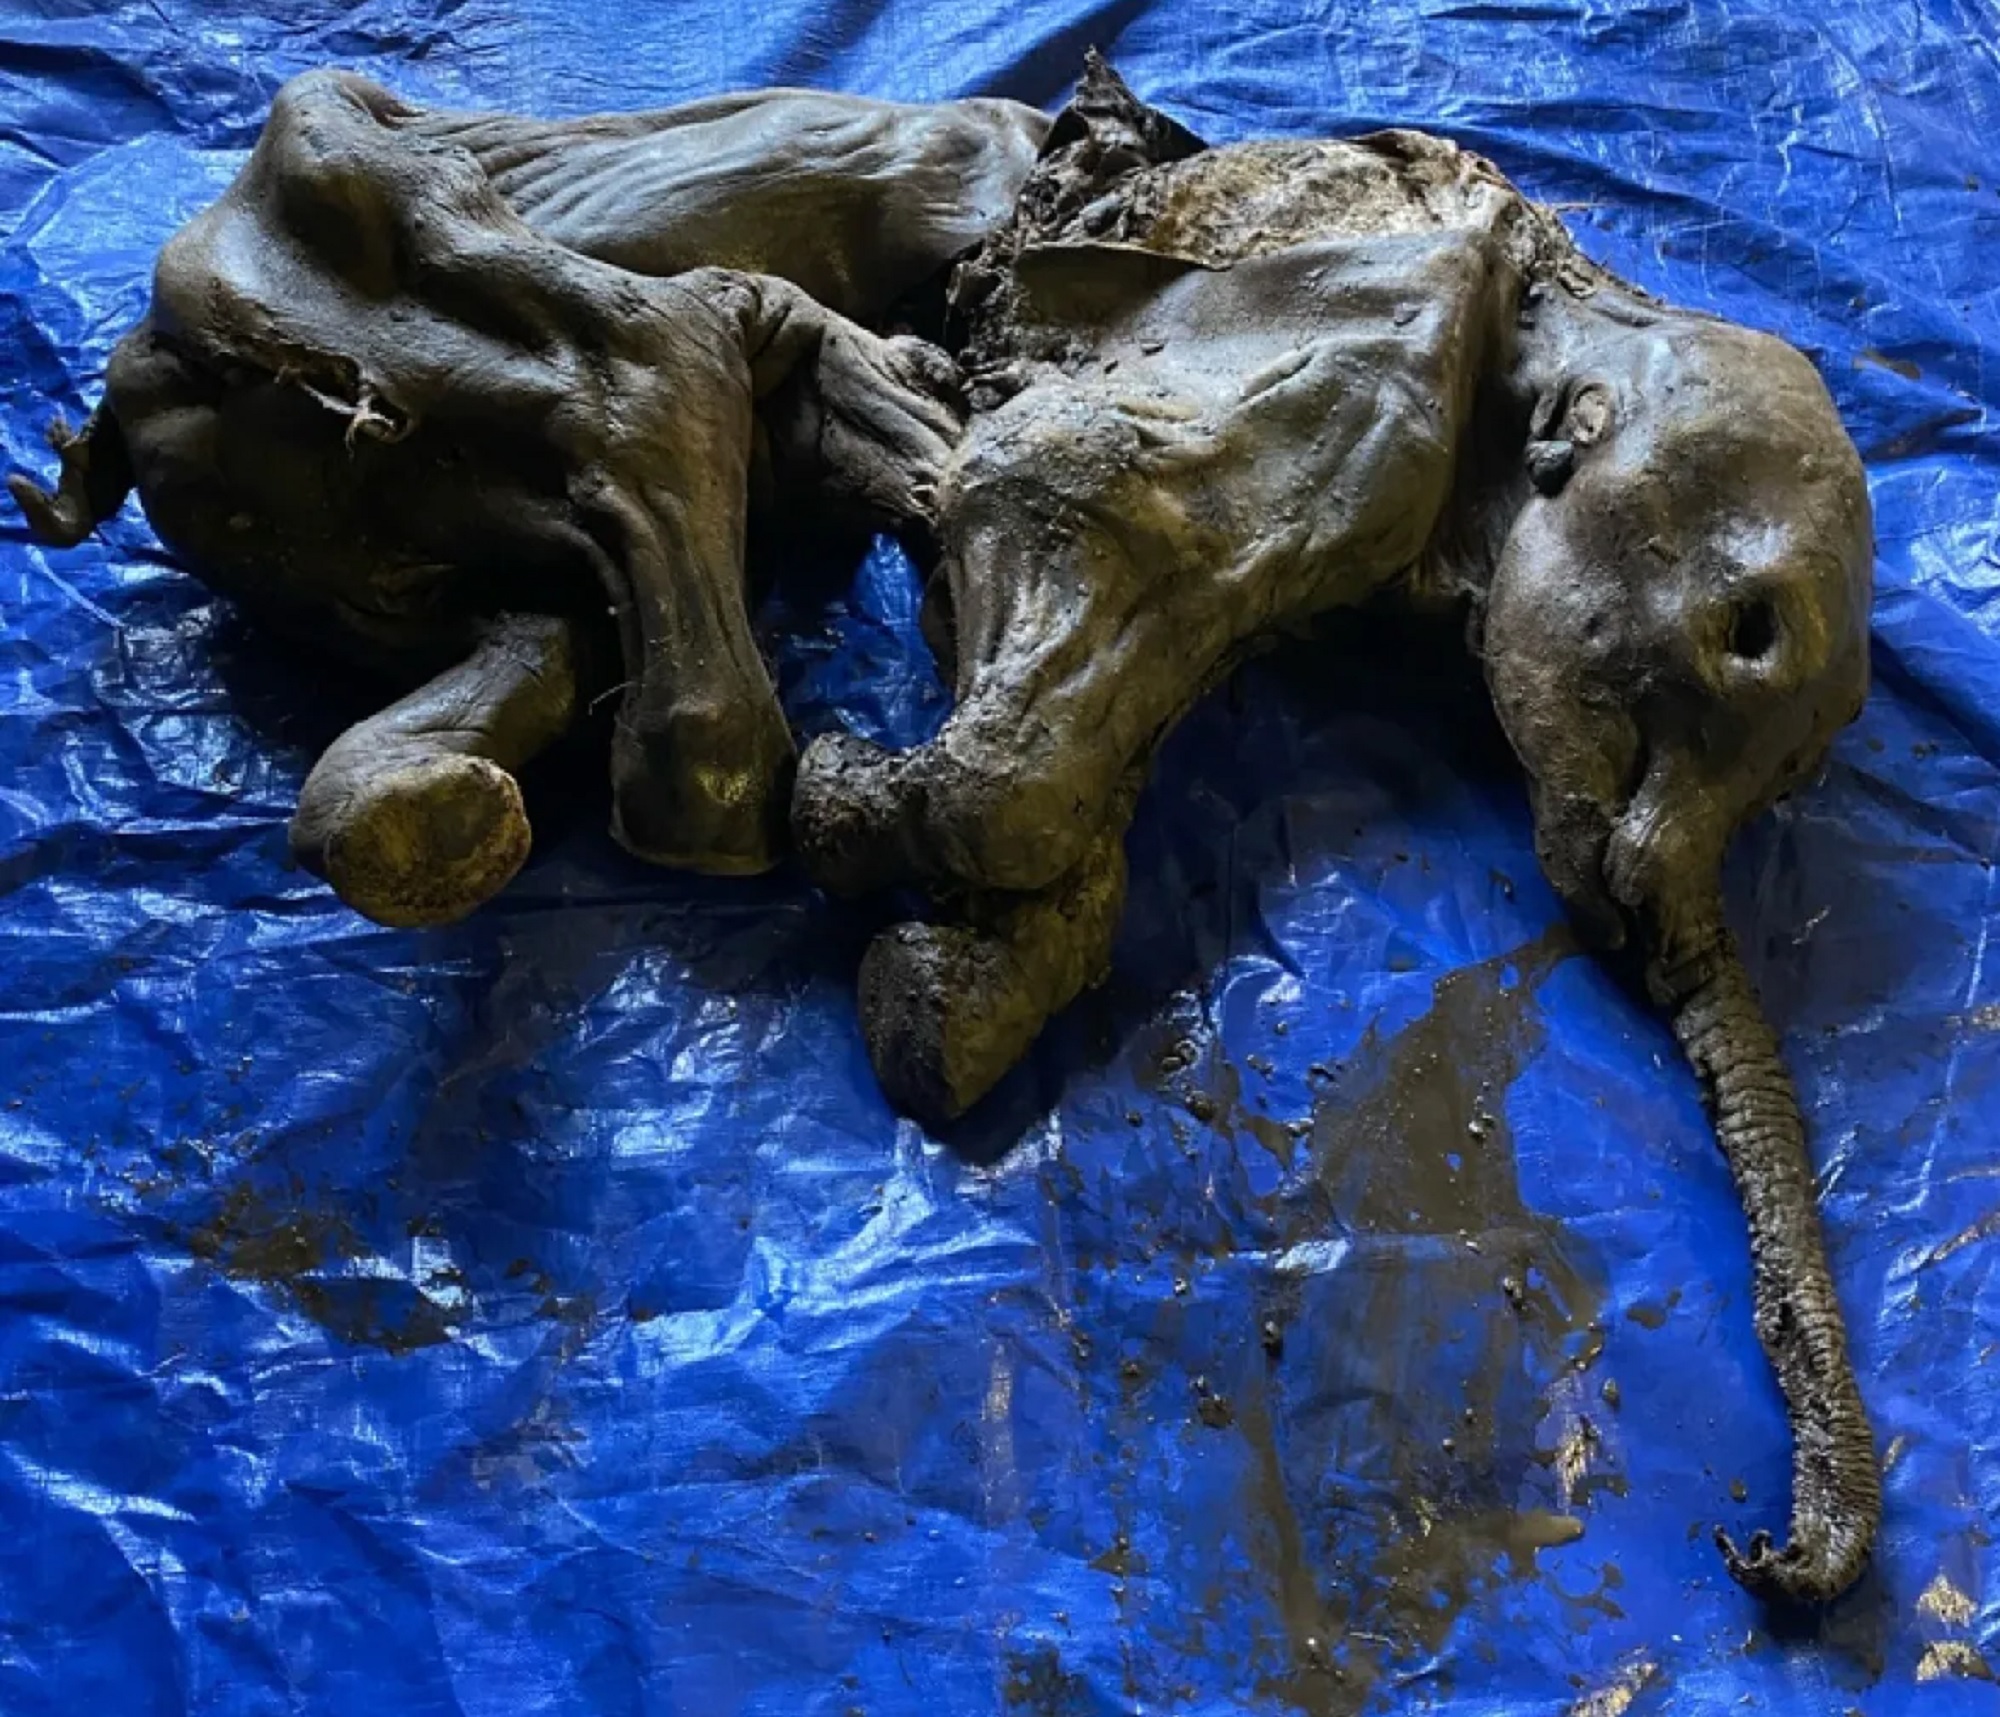 This is the most-complete woolly mammoth ever found in North America